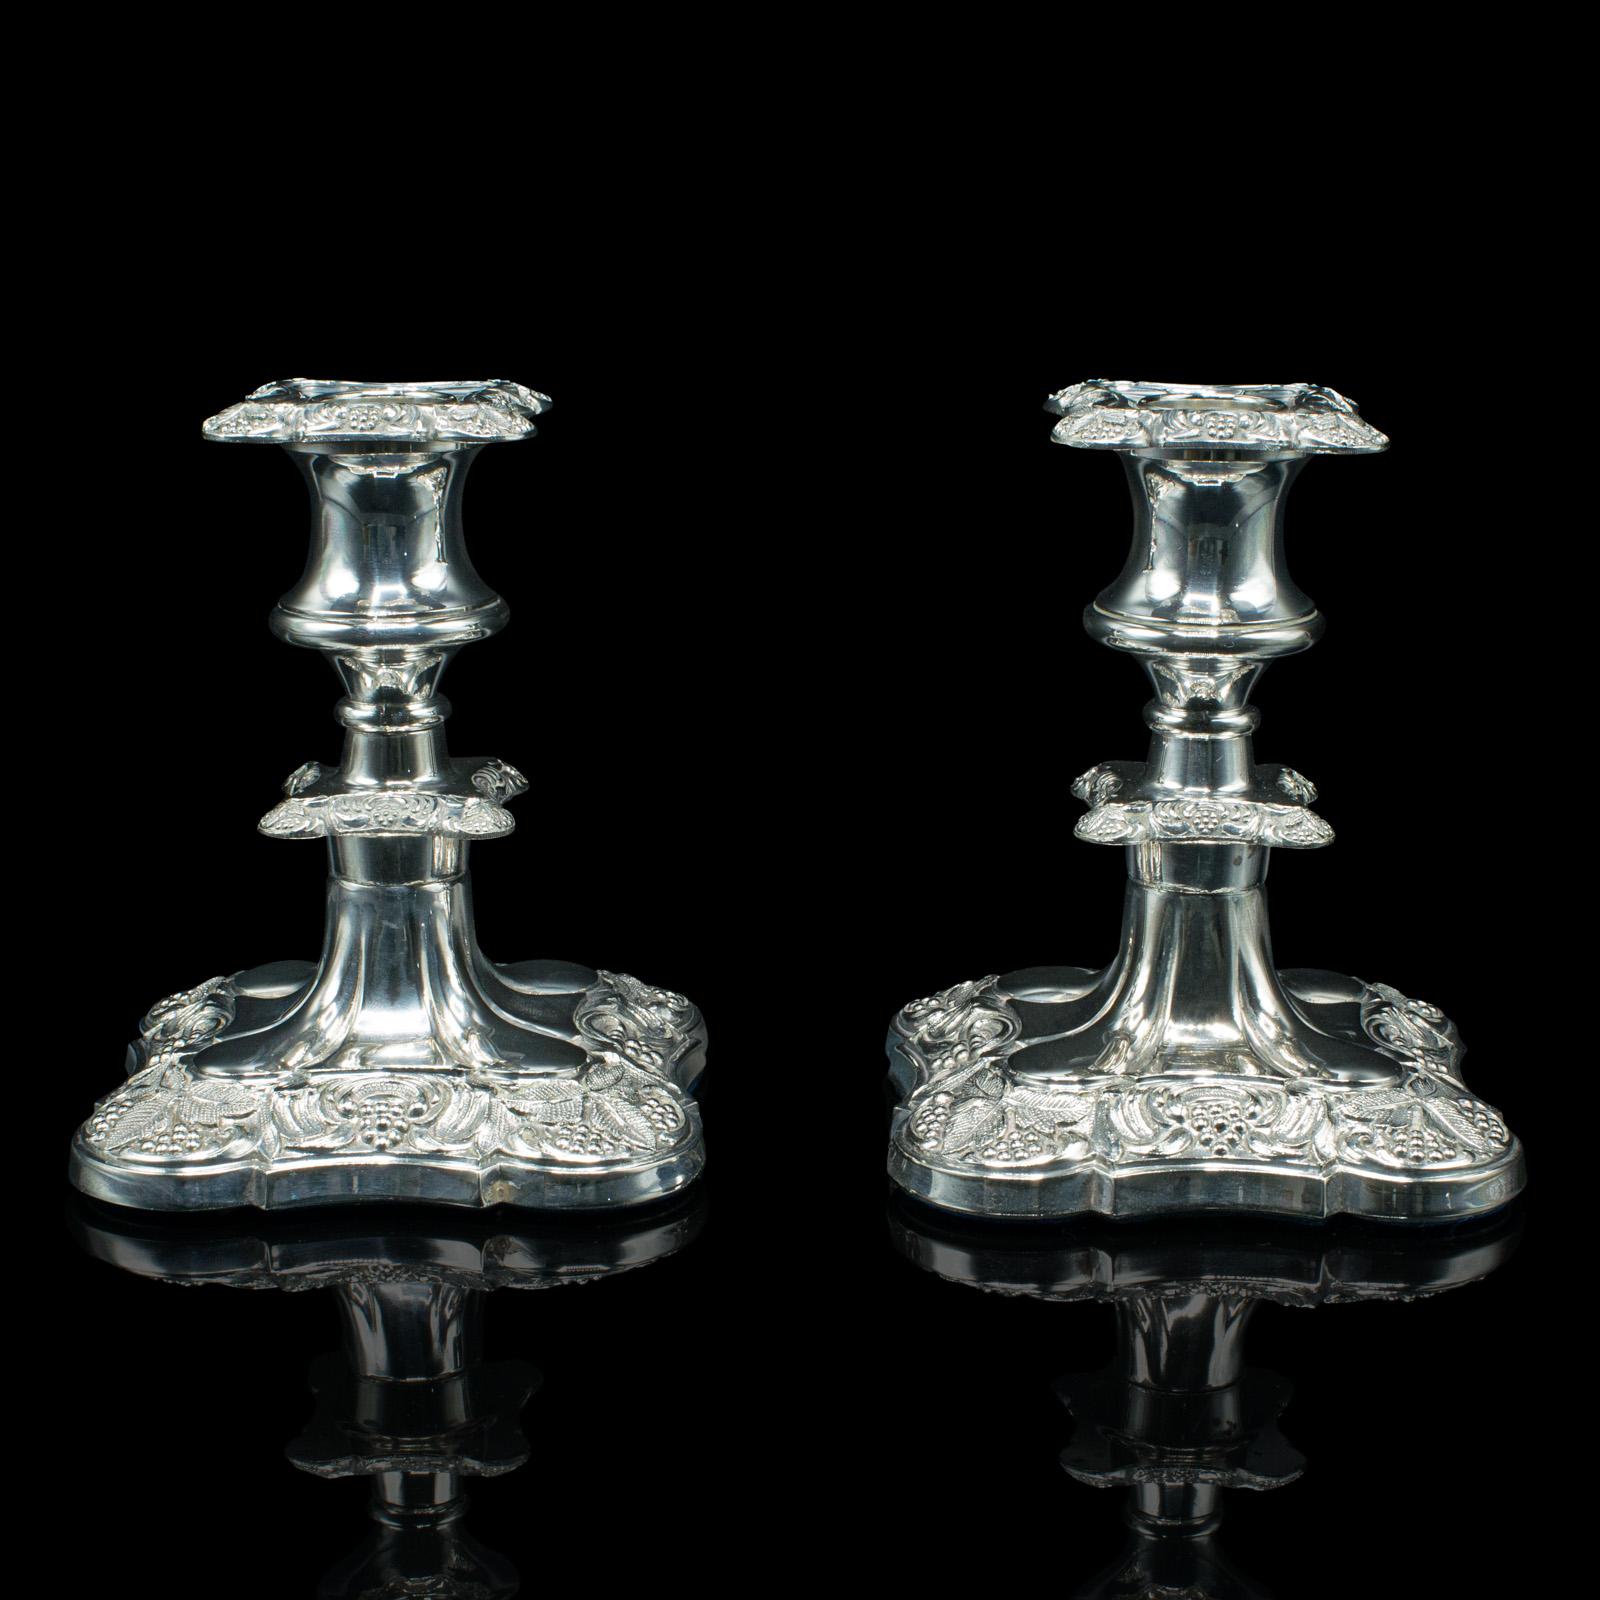 This is an antique pair of candlesticks. An English, silver plated decorative candle holder, dating to the late Victorian period, circa 1900.

Appealing late Victorian pair with fine detail and elegant craftsmanship
Displaying a desirable aged